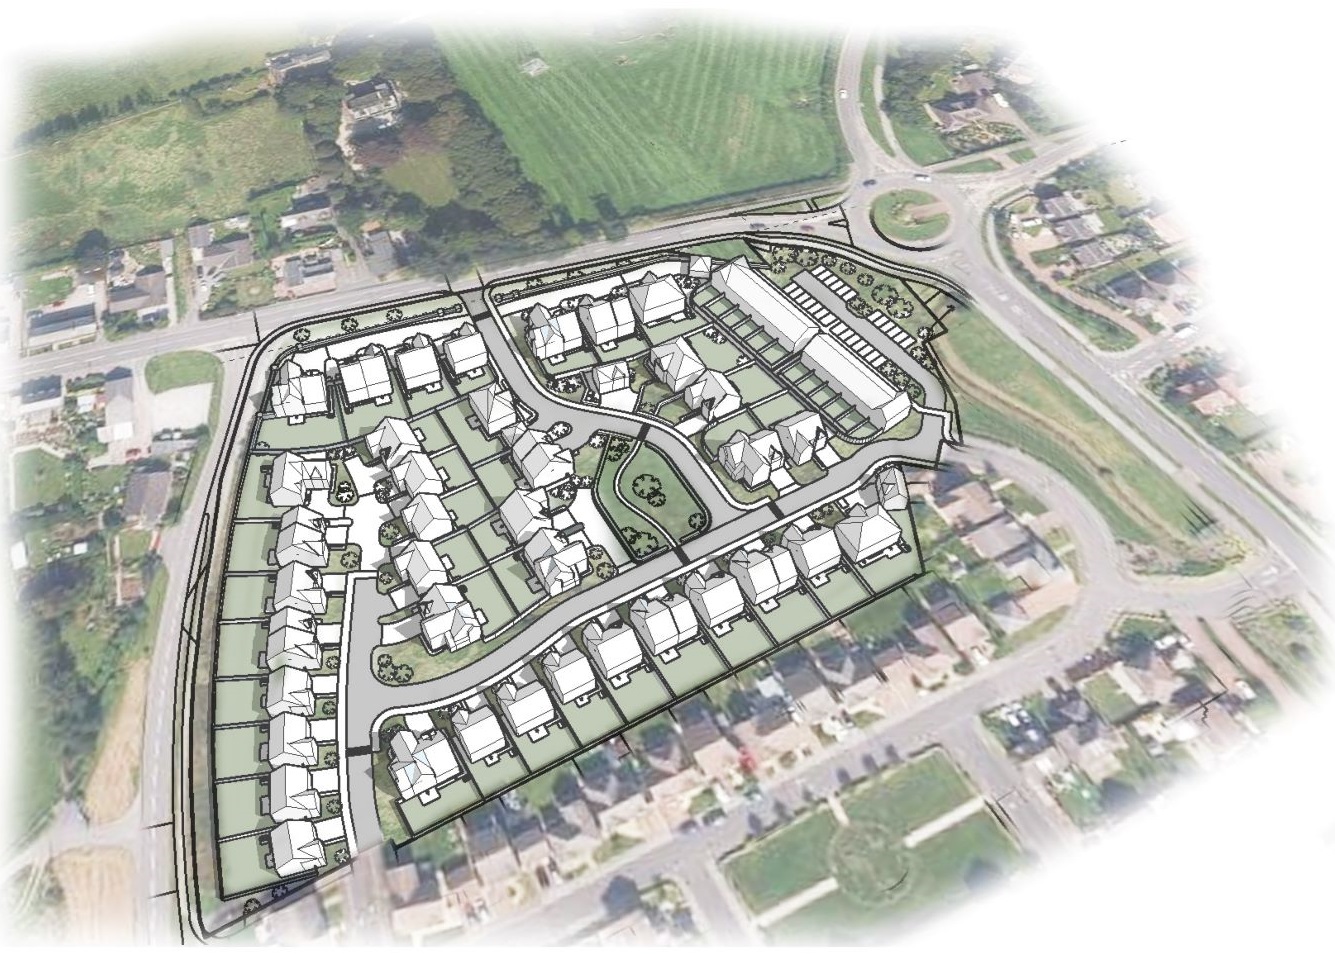 Cala lodges plans for 50 homes at new Westhill site